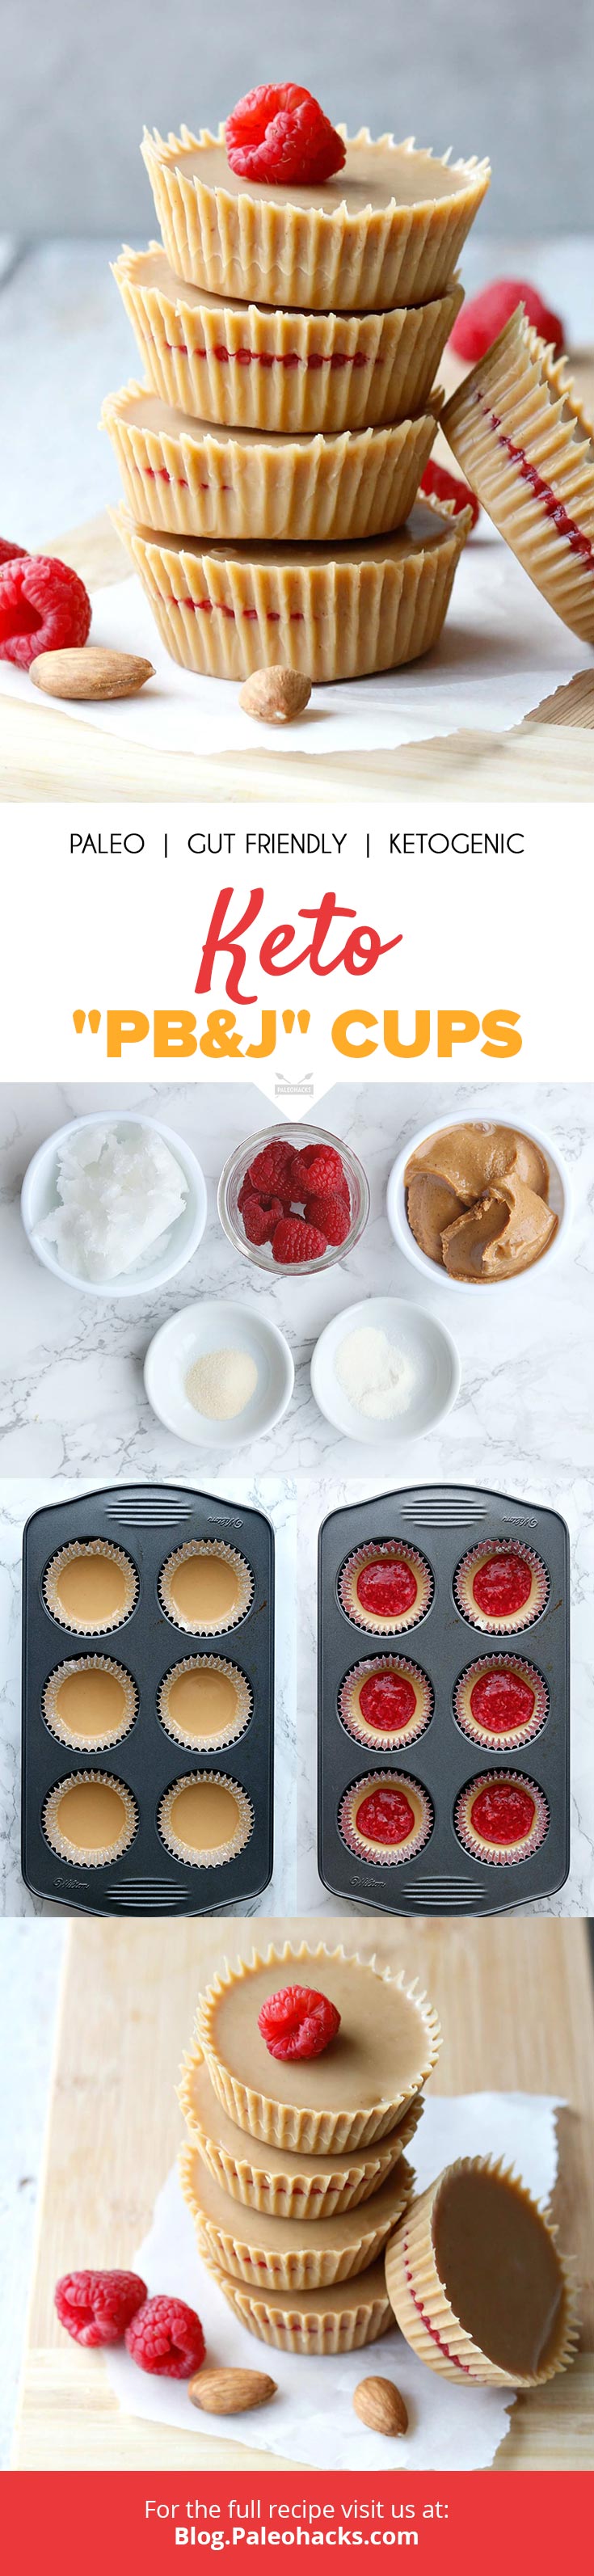 Filled with real raspberries and creamy almond butter, these keto PB&J cups are a healthy, guilt-free treat.